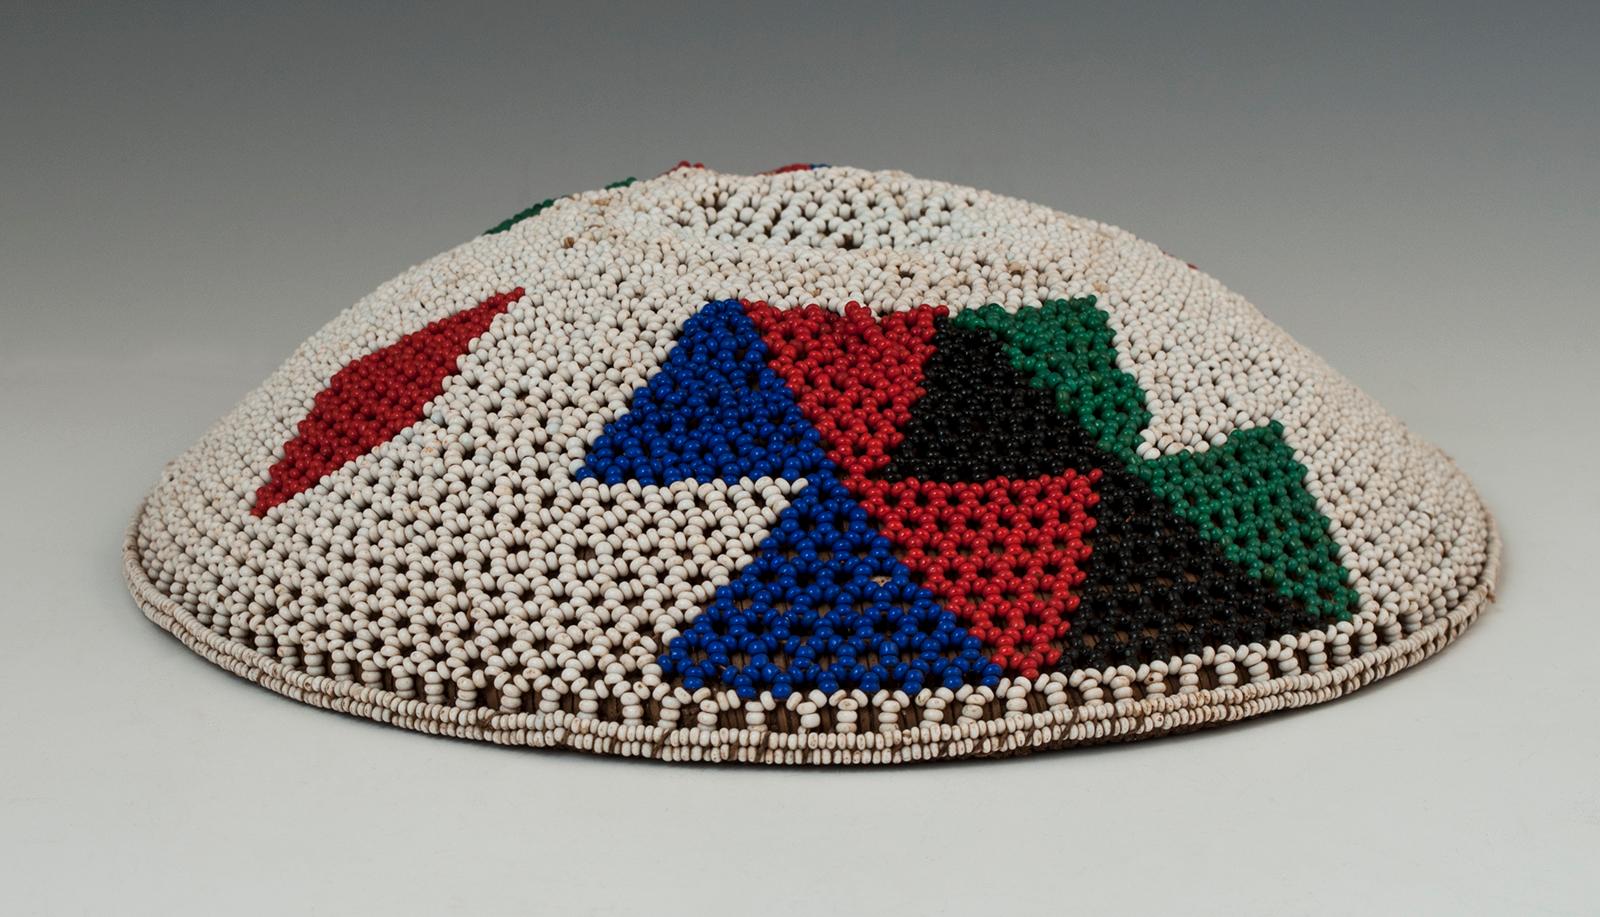 Mid-20th century beer pot cover (Imbengi) Zulu People, South Africa

These beaded covers were used over the mouth of a traditional ceramic beet pot, Ukhamba, to protect the sorghum beer from dust and flies. This is one with a lacy look and is in